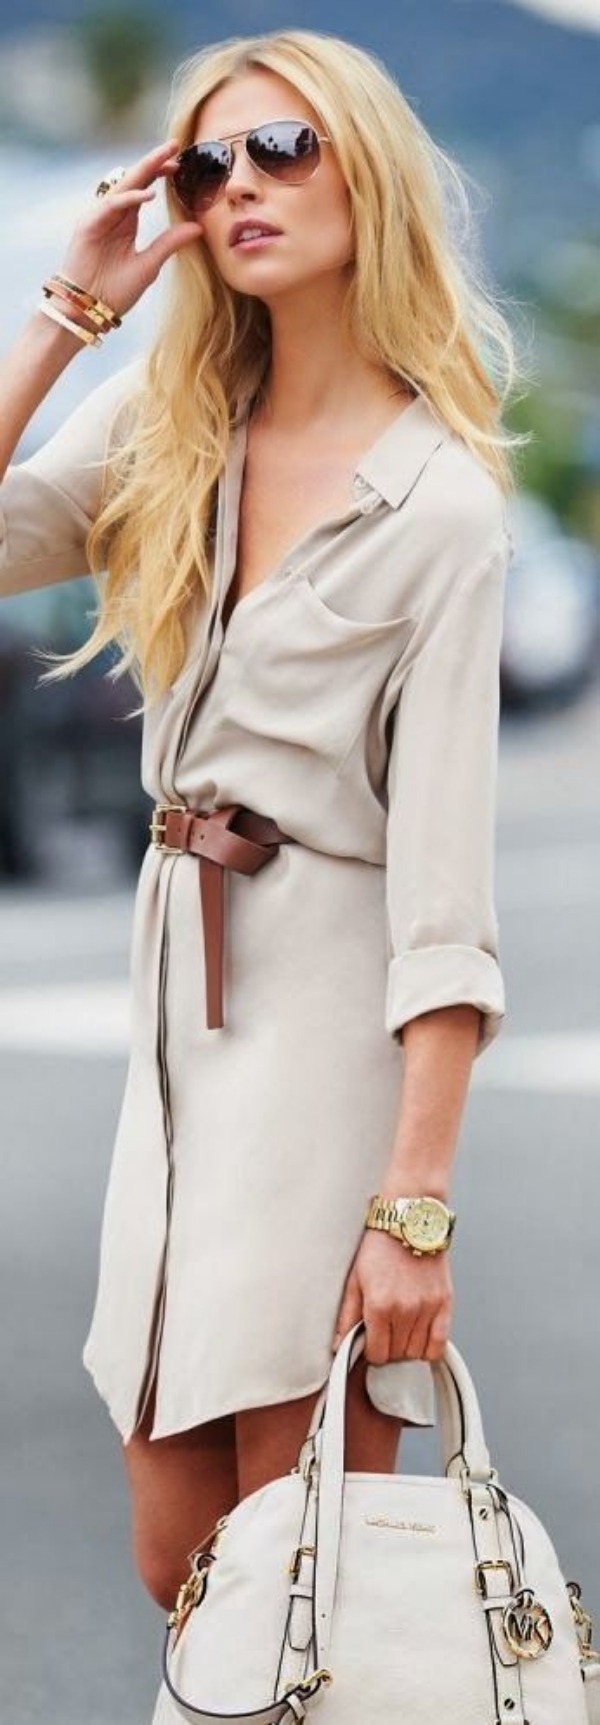 40 Bewitching Summer Work Outfits for Women - Fashiondioxide